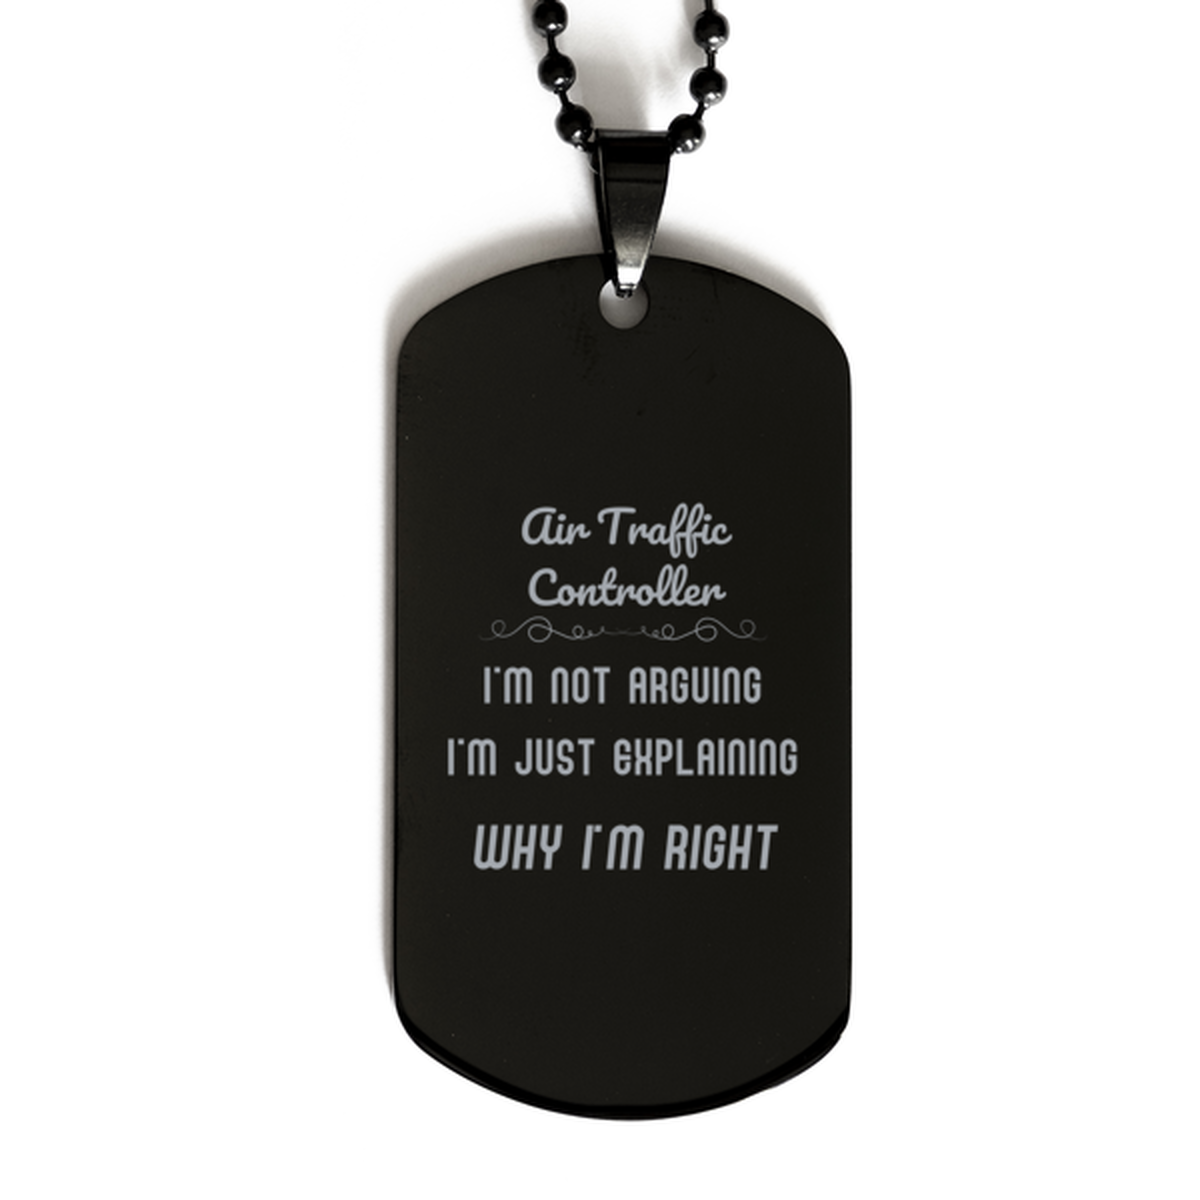 Air Traffic Controller I'm not Arguing. I'm Just Explaining Why I'm RIGHT Black Dog Tag, Funny Saying Quote Air Traffic Controller Gifts For Air Traffic Controller Graduation Birthday Christmas Gifts for Men Women Coworker